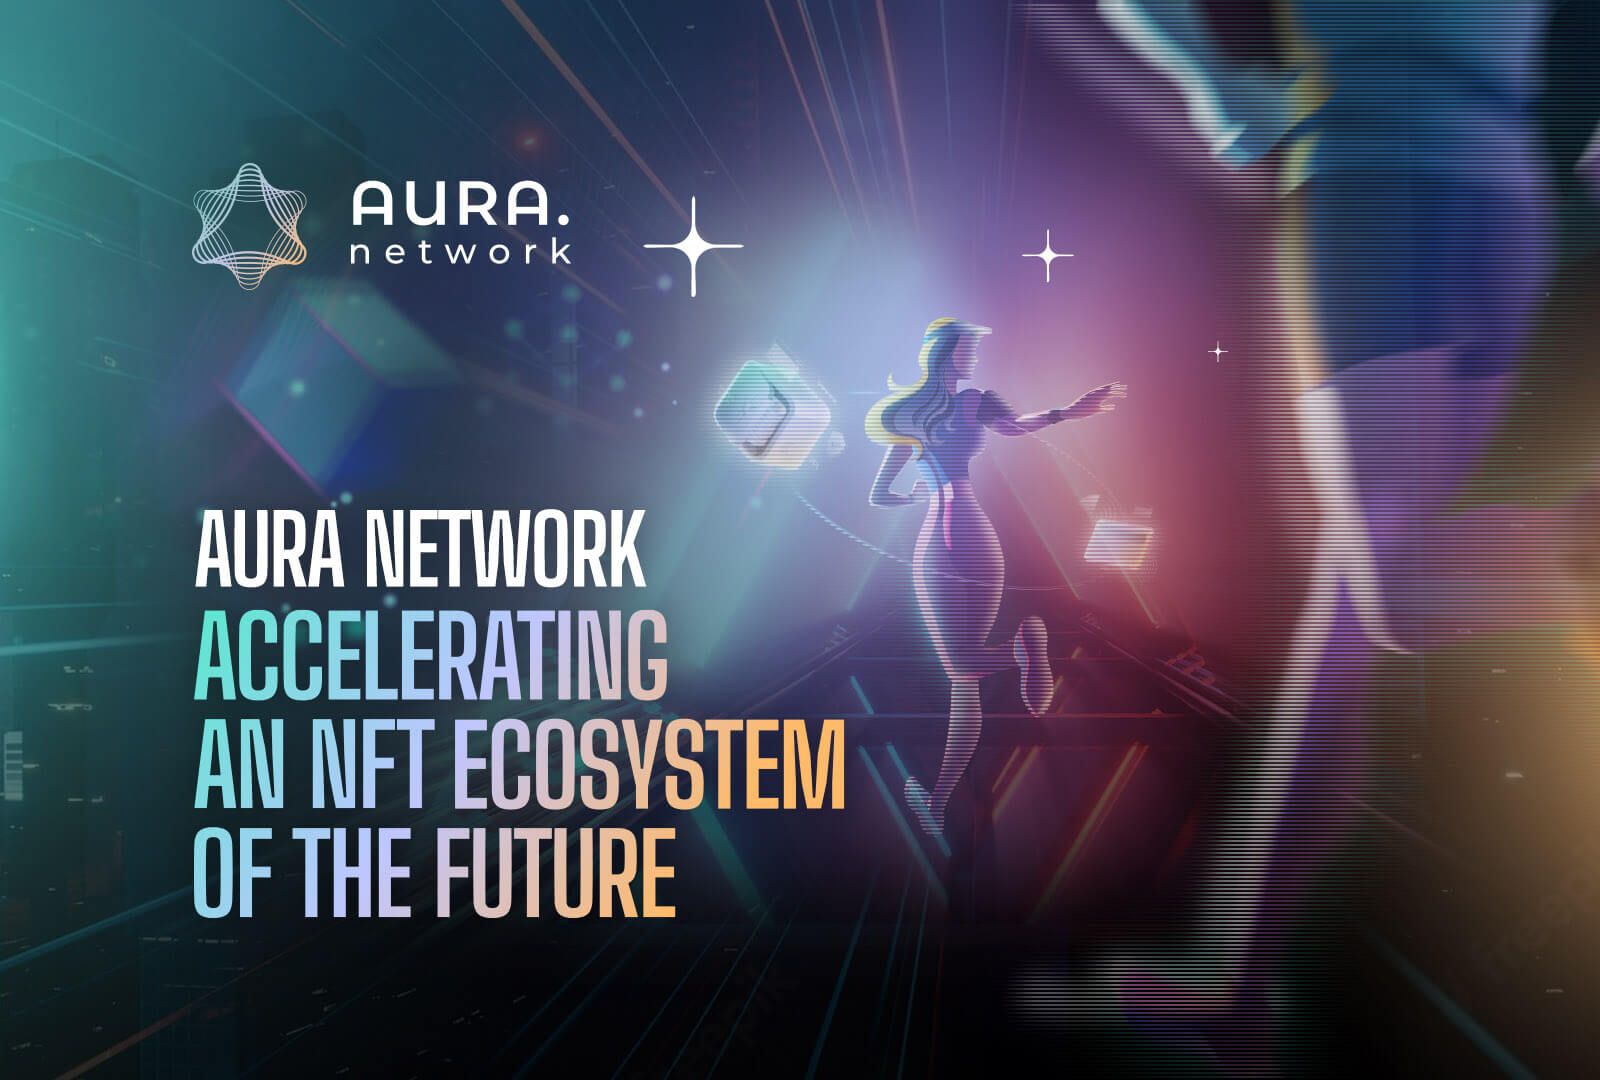 Aura Network: Accelerating an NFT ecosystem of the future